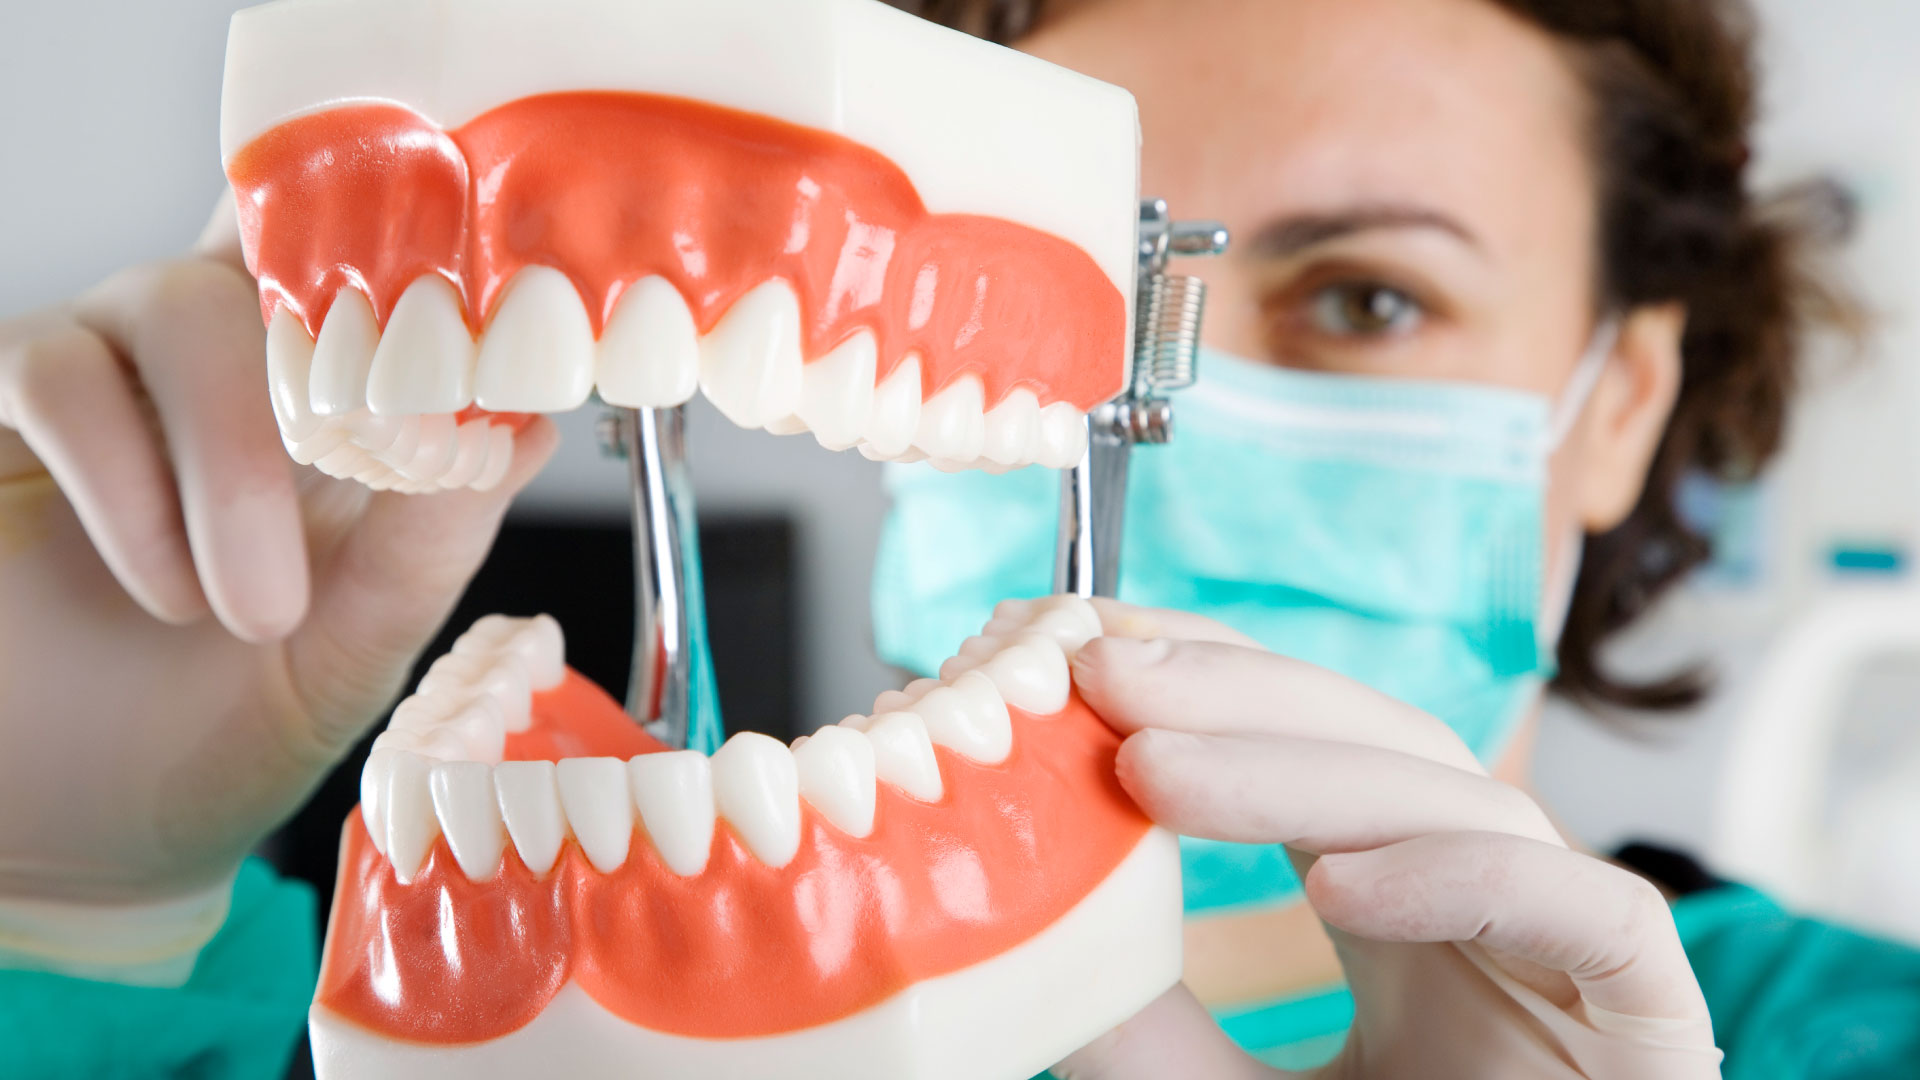 WHAT IS PERIODONTITIS AND HOW CAN IT CAUSE LOSS OF DENTAL PIECES?